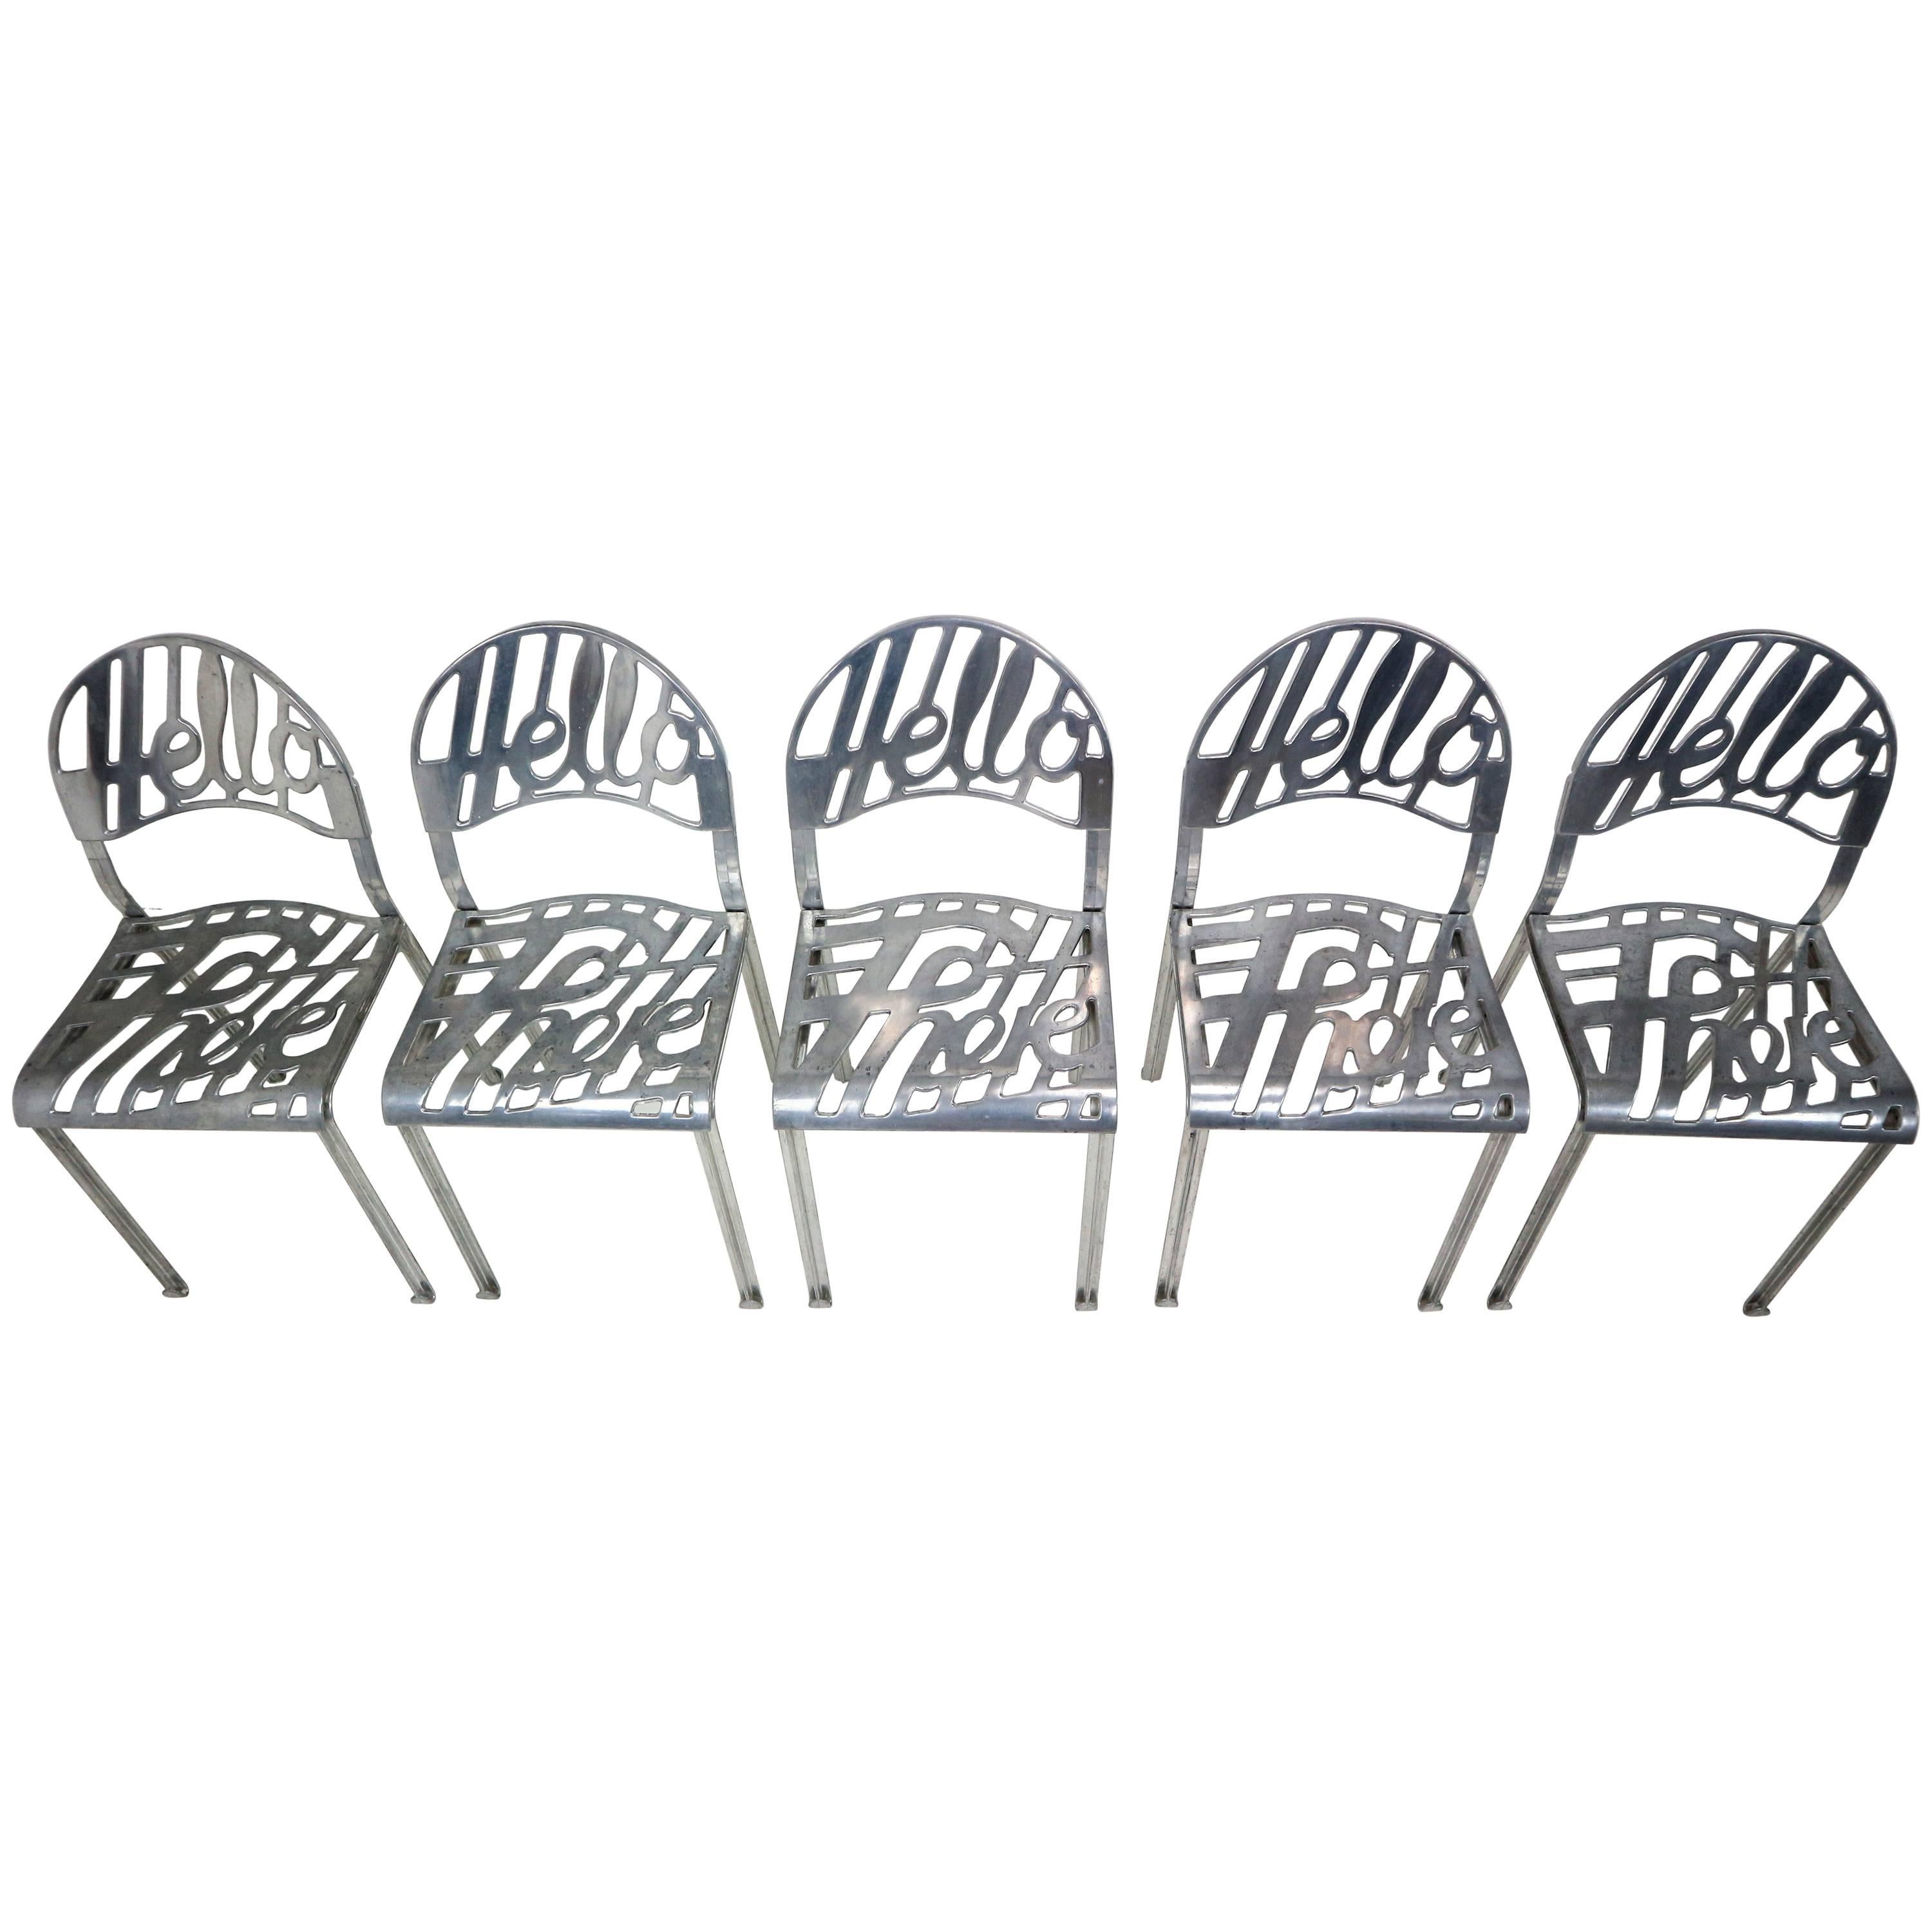 Set of Five Jeremy Harvey "Hello There" Chairs for Artifort